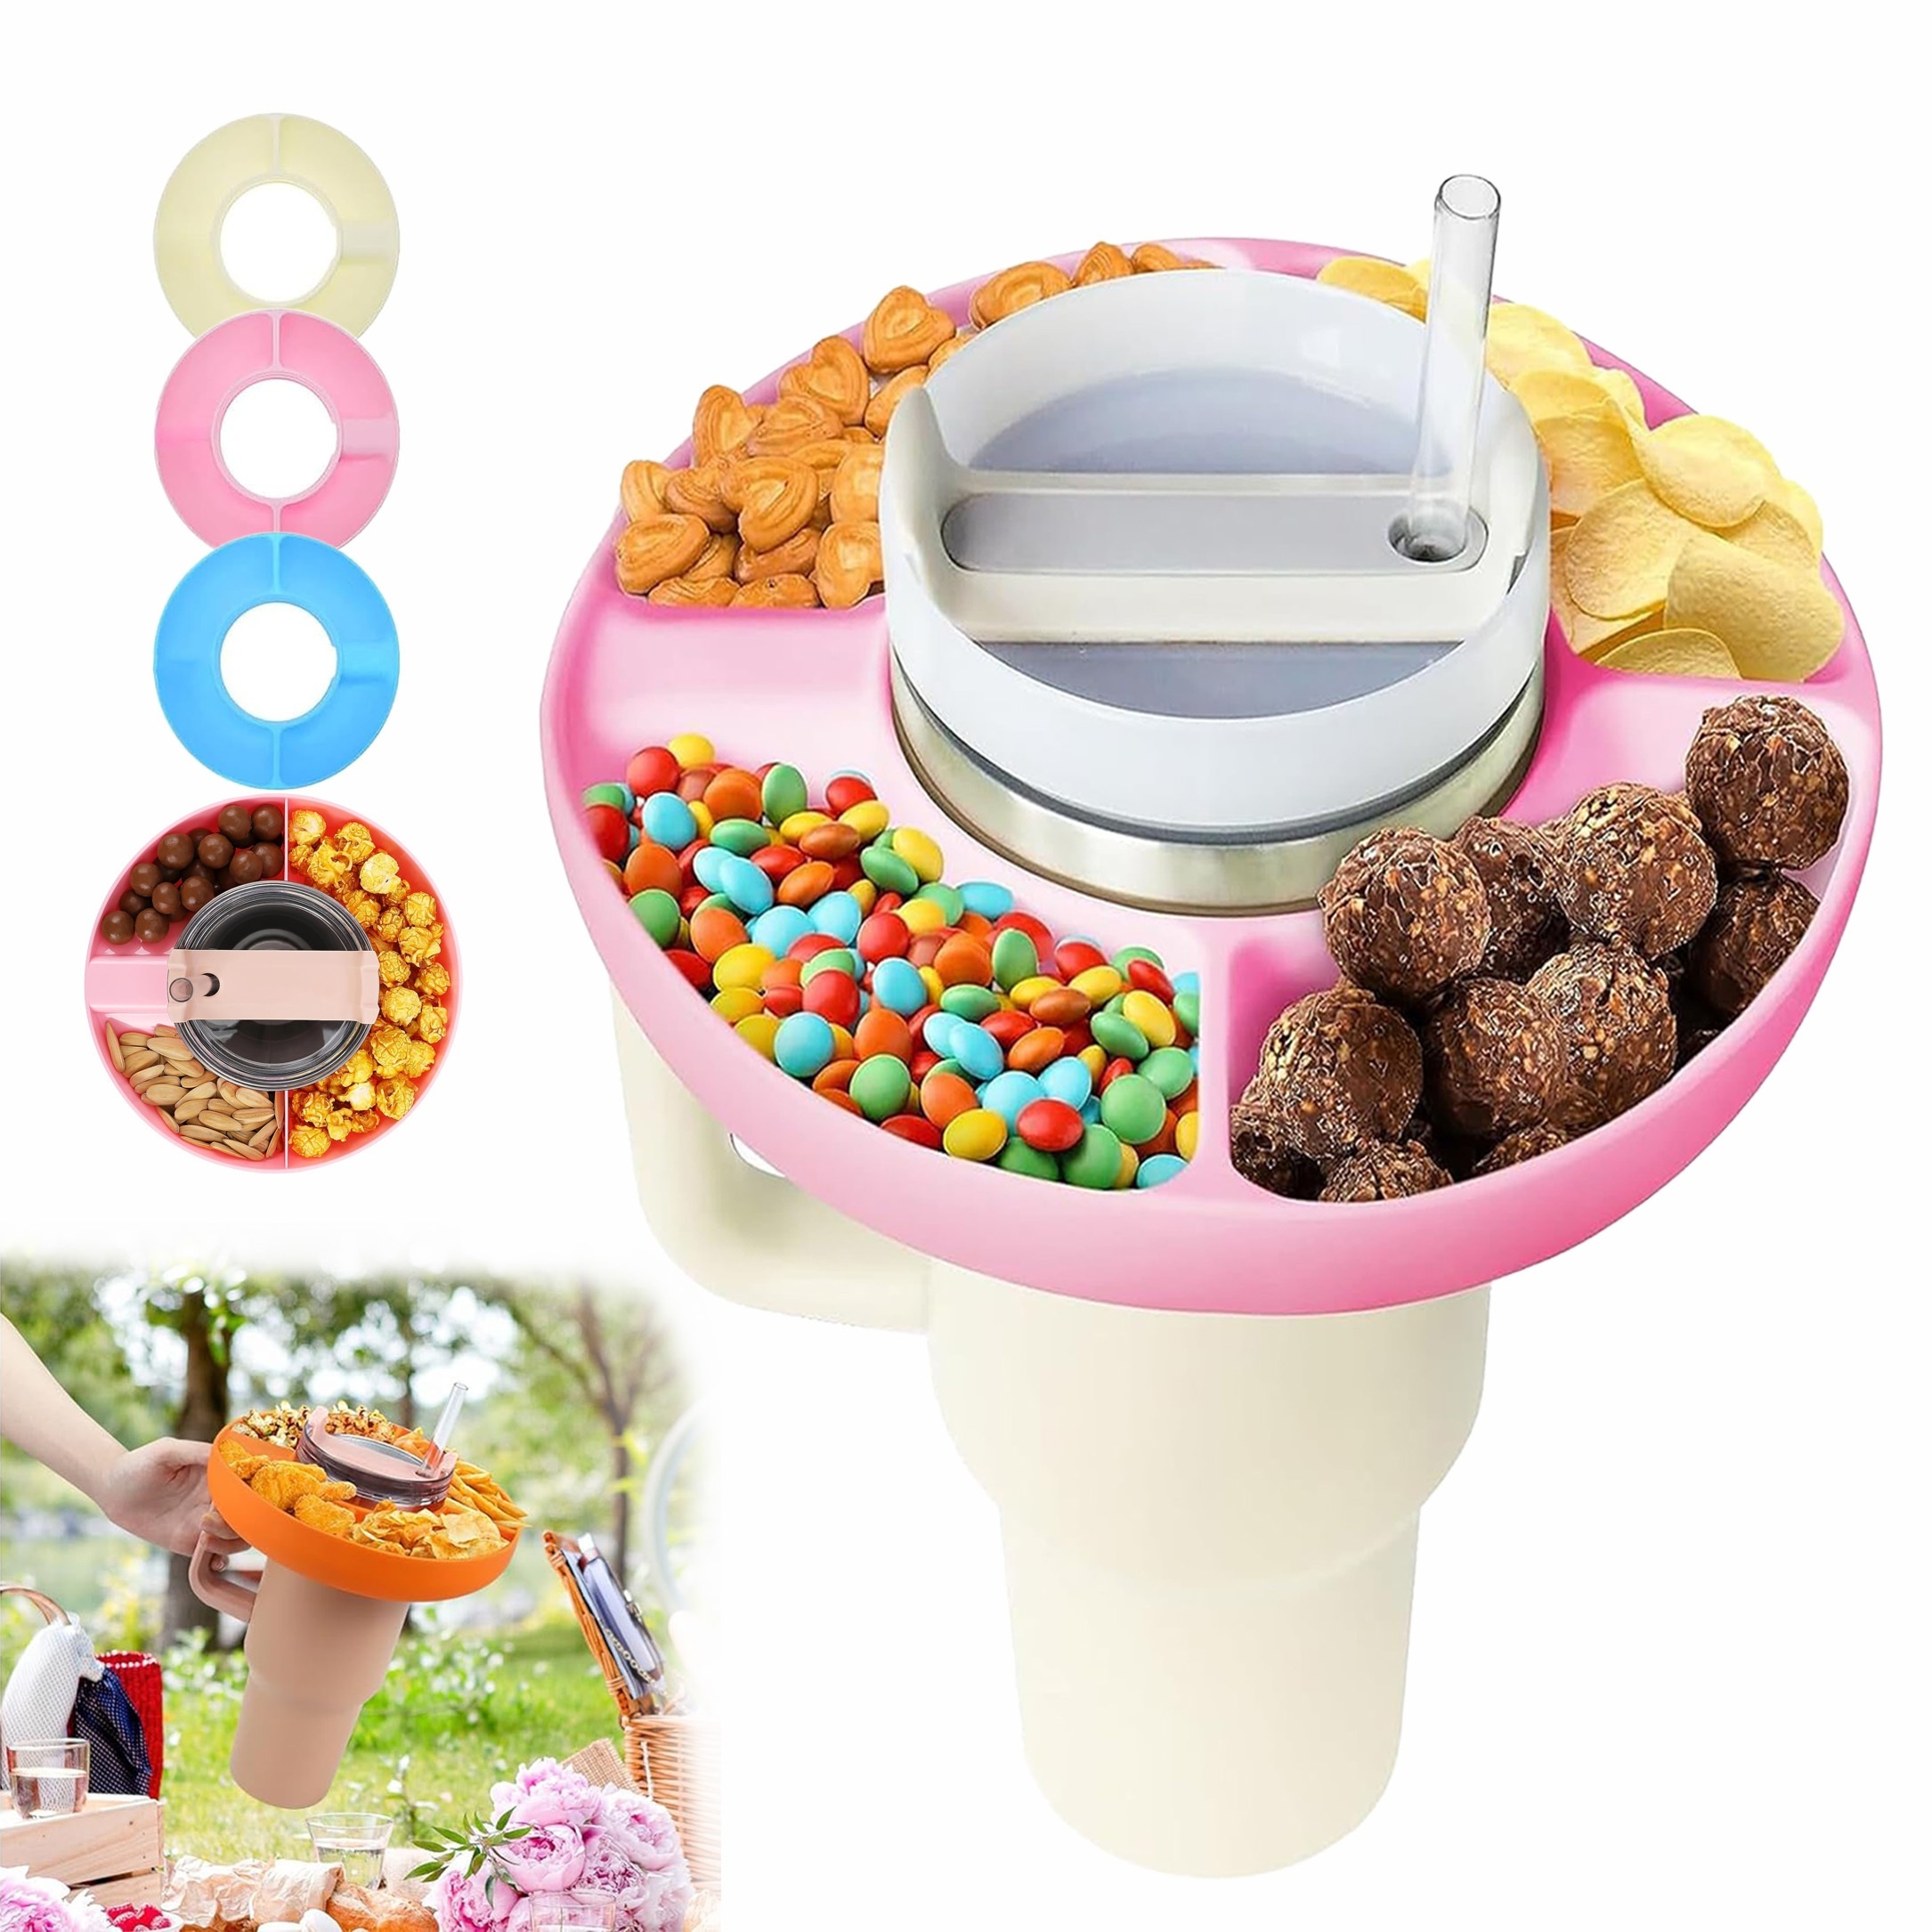 Snack Bowl For Stanley Tumbler Accessories,Silicone Snack For